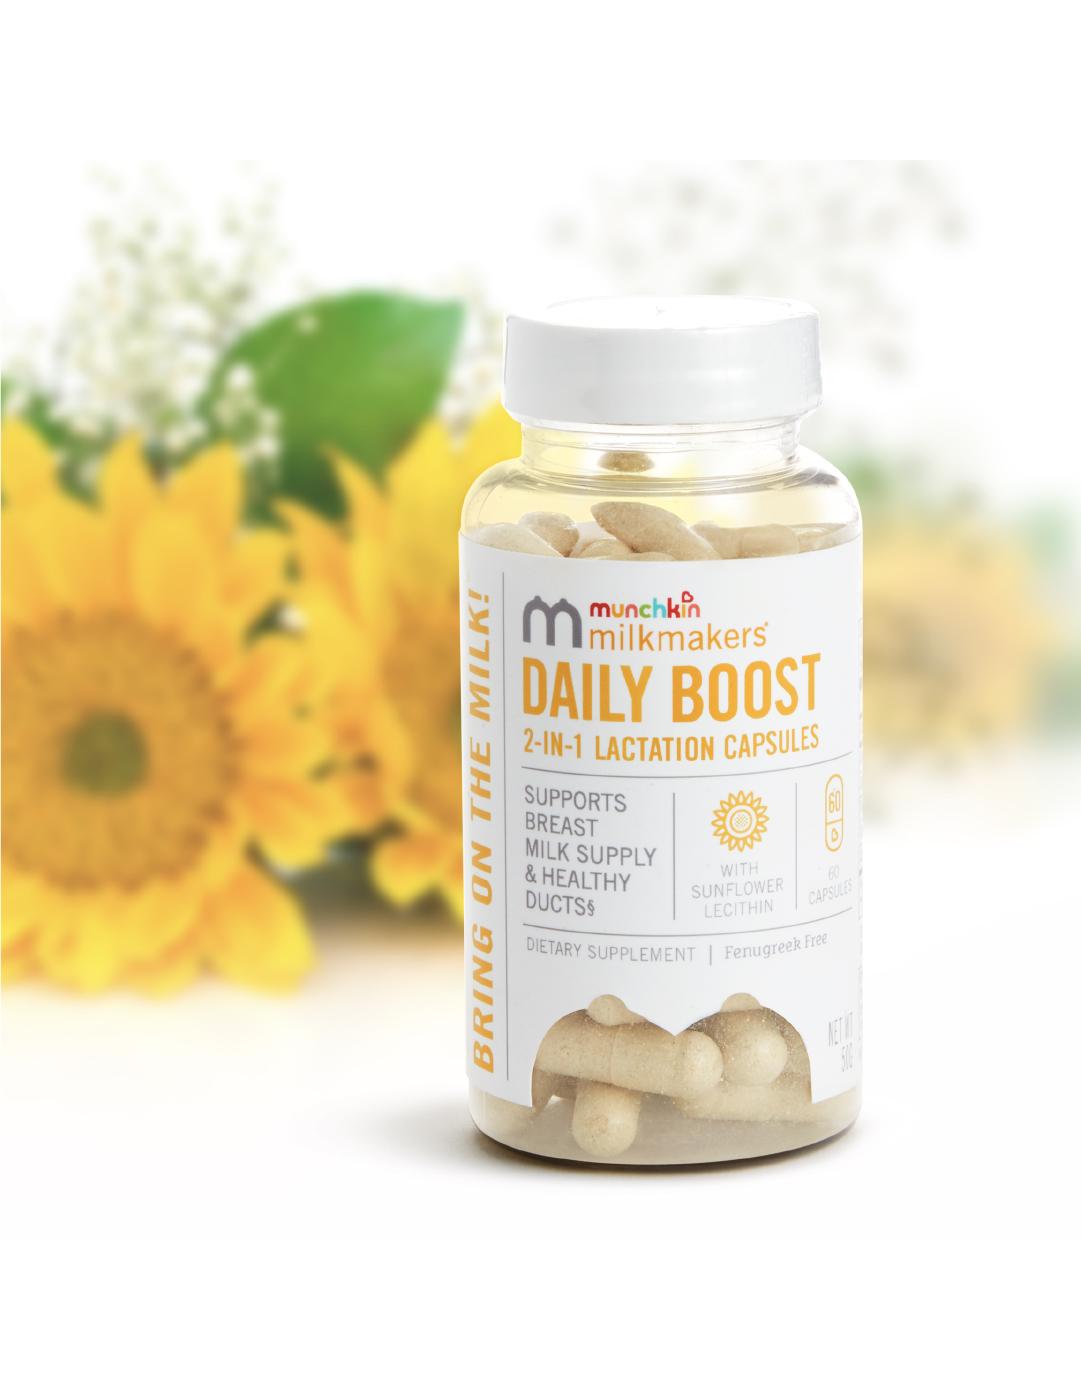 Munchkin Daily Boost 2-IN-1 Lactation Capsules; image 3 of 6